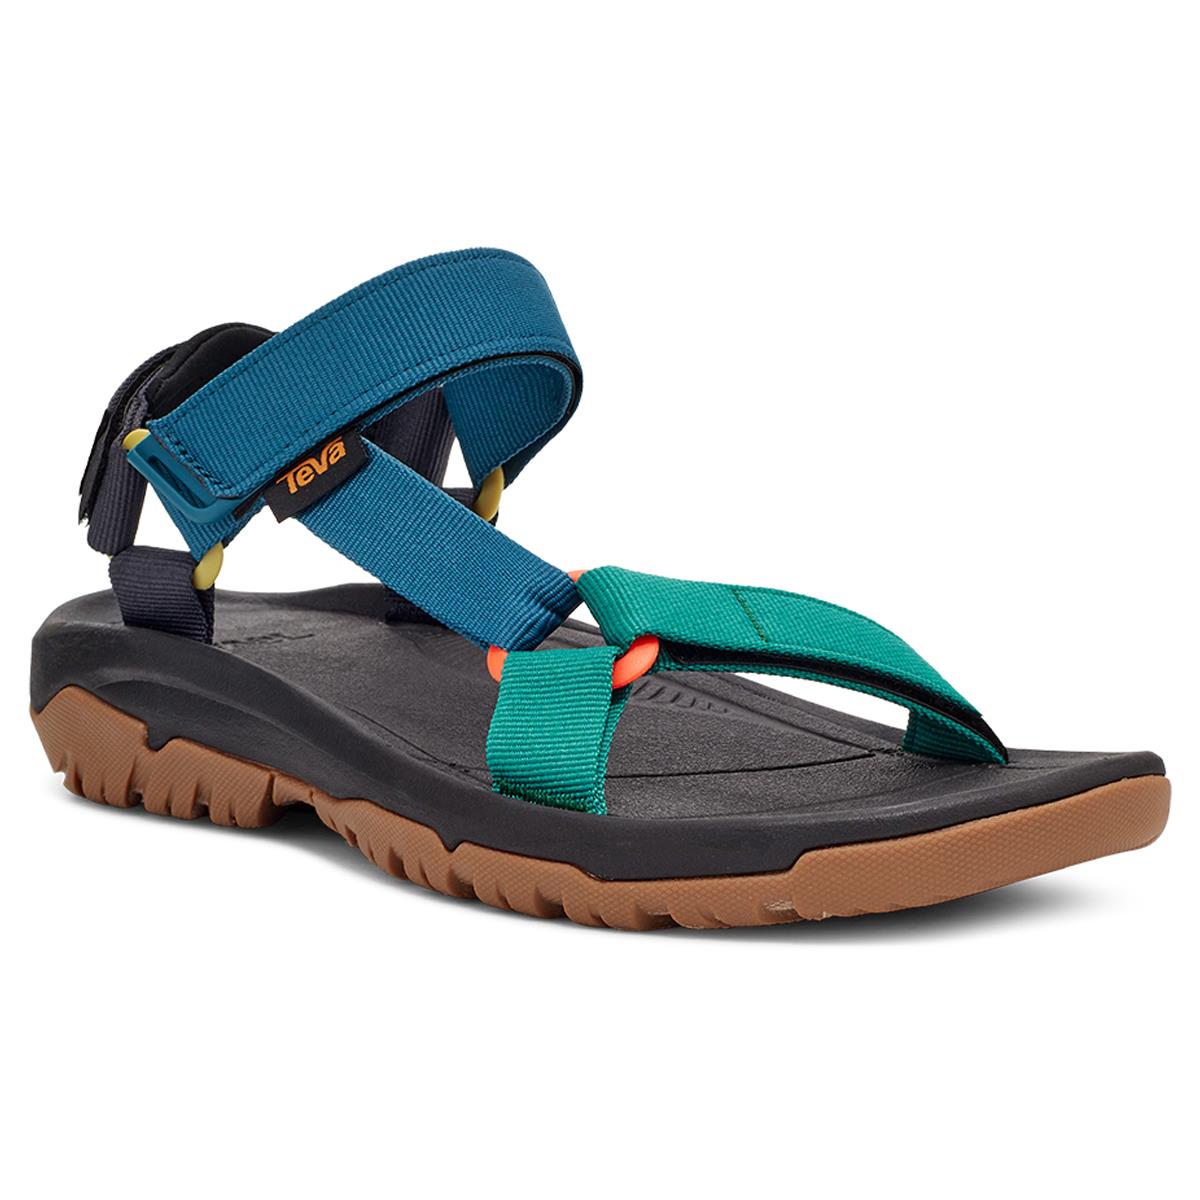 Do the straps pull loose from the soles like my (3) pair of Teva Tanza sandals did?